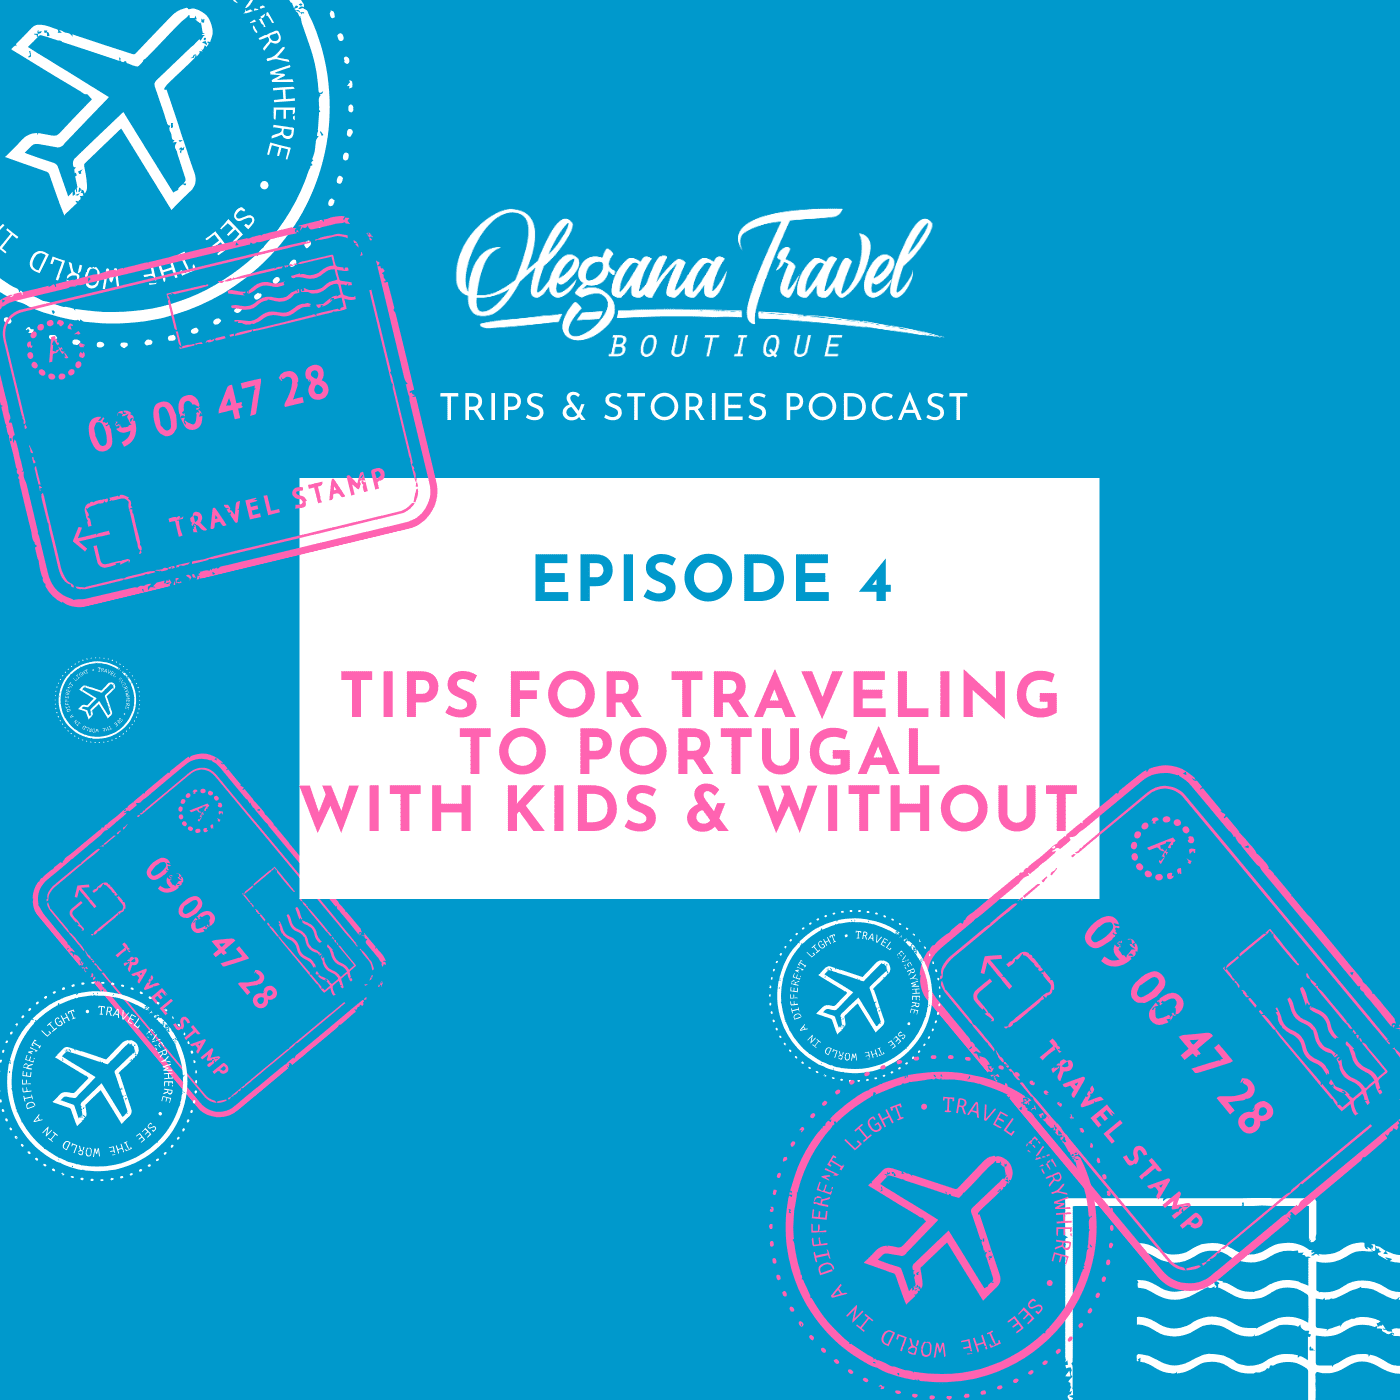 Traveling with kids to Portugal will be a breeze after you get all our travel tips for families - from the best hotels to how to avoid crowds!